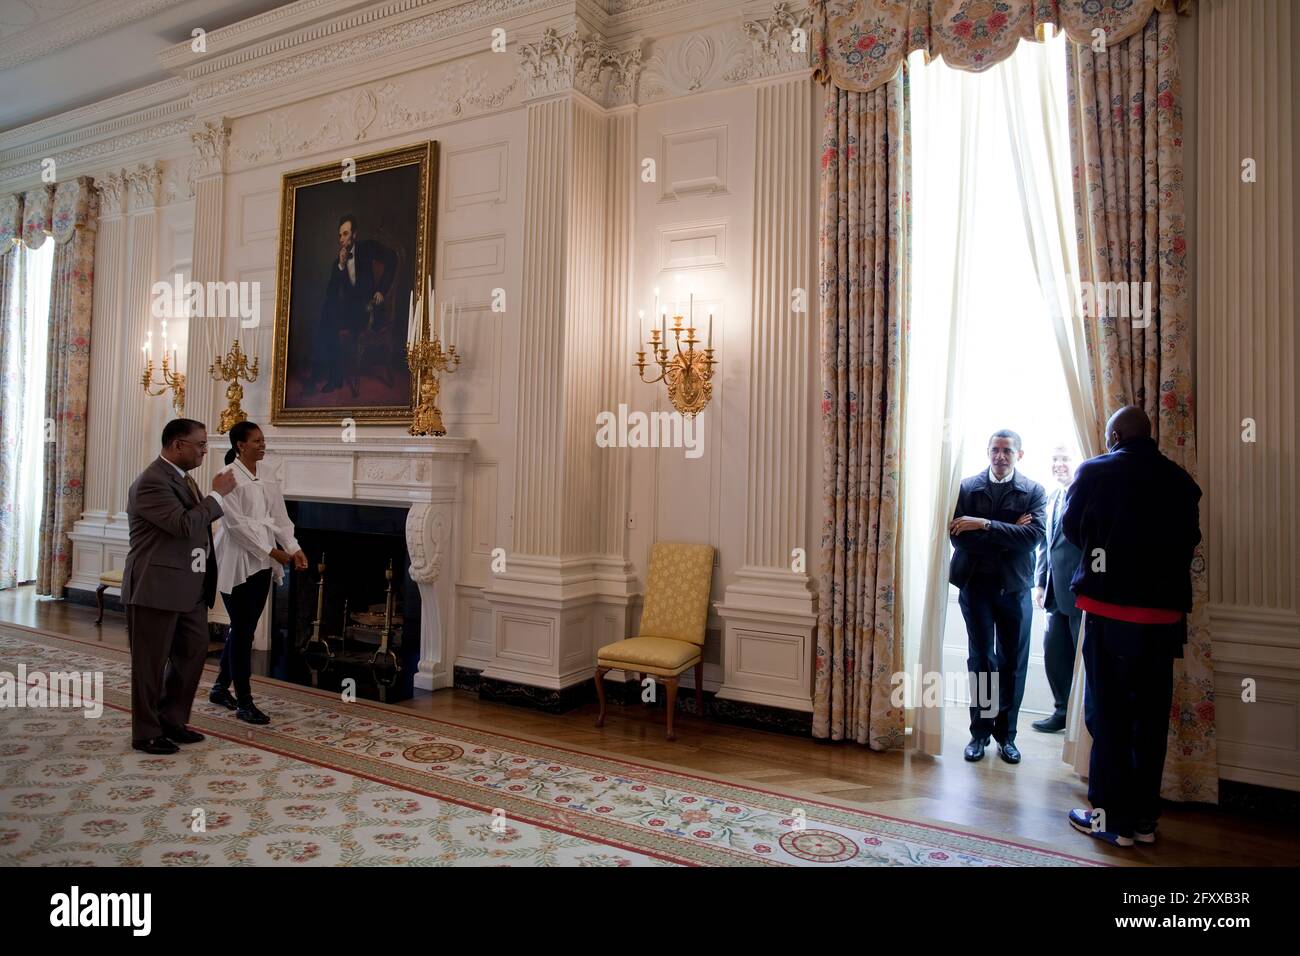 President Barack Obama and First Lady Michelle Obama tour the State Dining Room with White House Chief Usher Admiral Stephen 'Steve' Rochon, left; Curator William 'Bill' Allman and Personal Aide Reggie Love, right.  1/24/09Offical White House Photo by Pete Souza Stock Photo